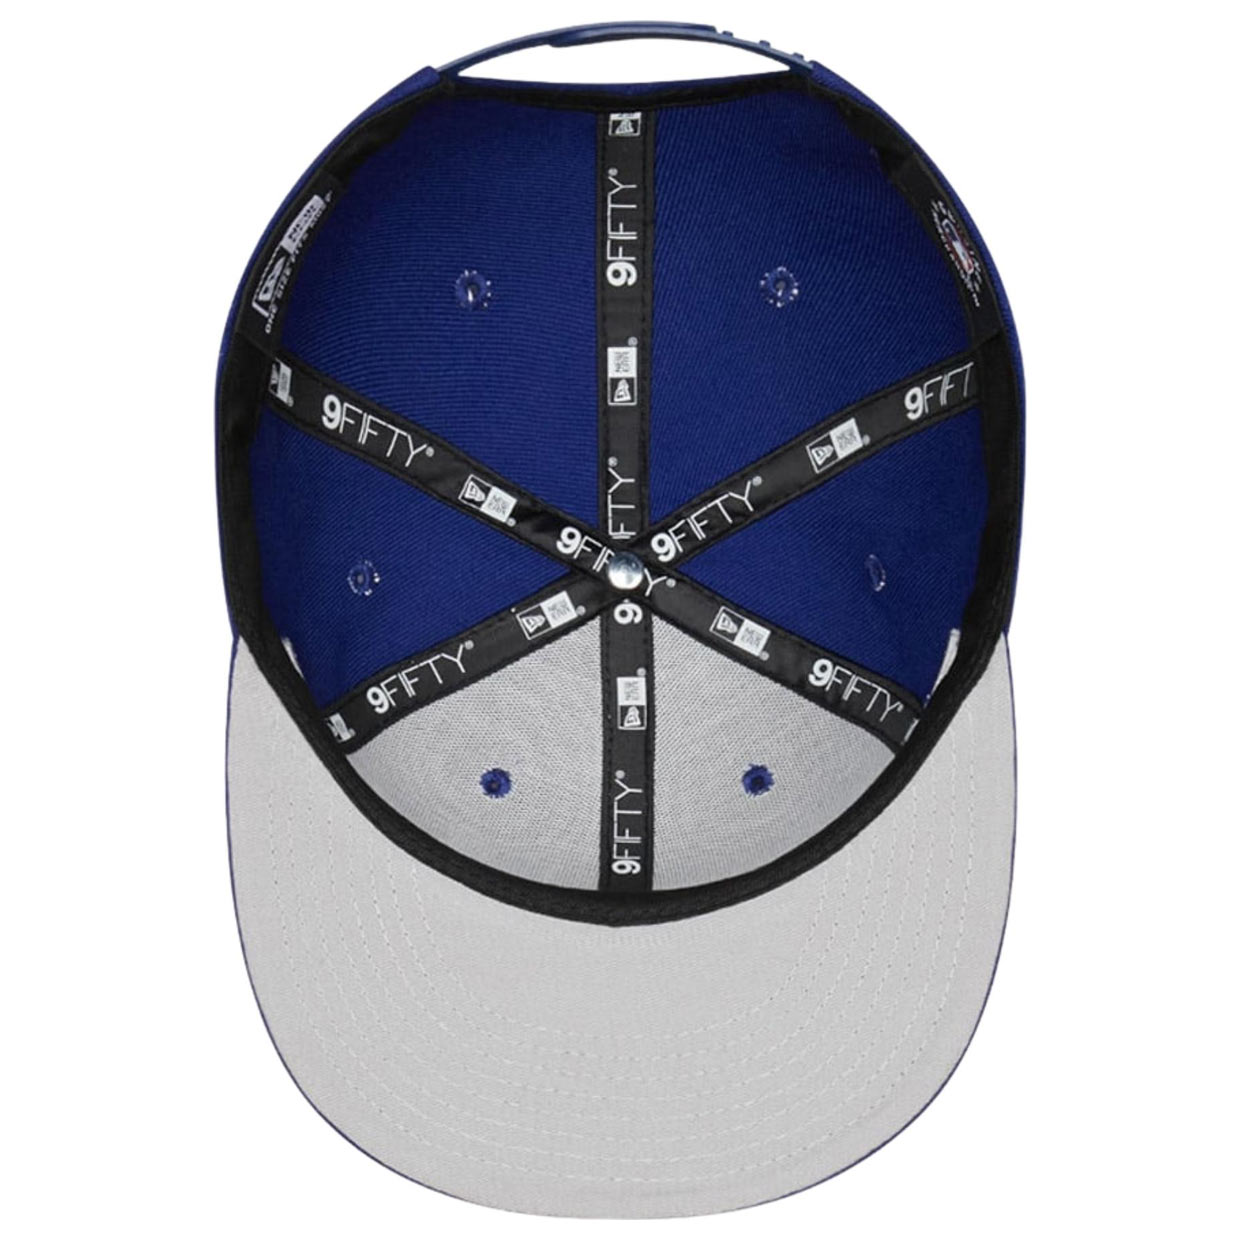 Kappe Los Angeles Dodgers Typography 9FIFTY Snapback